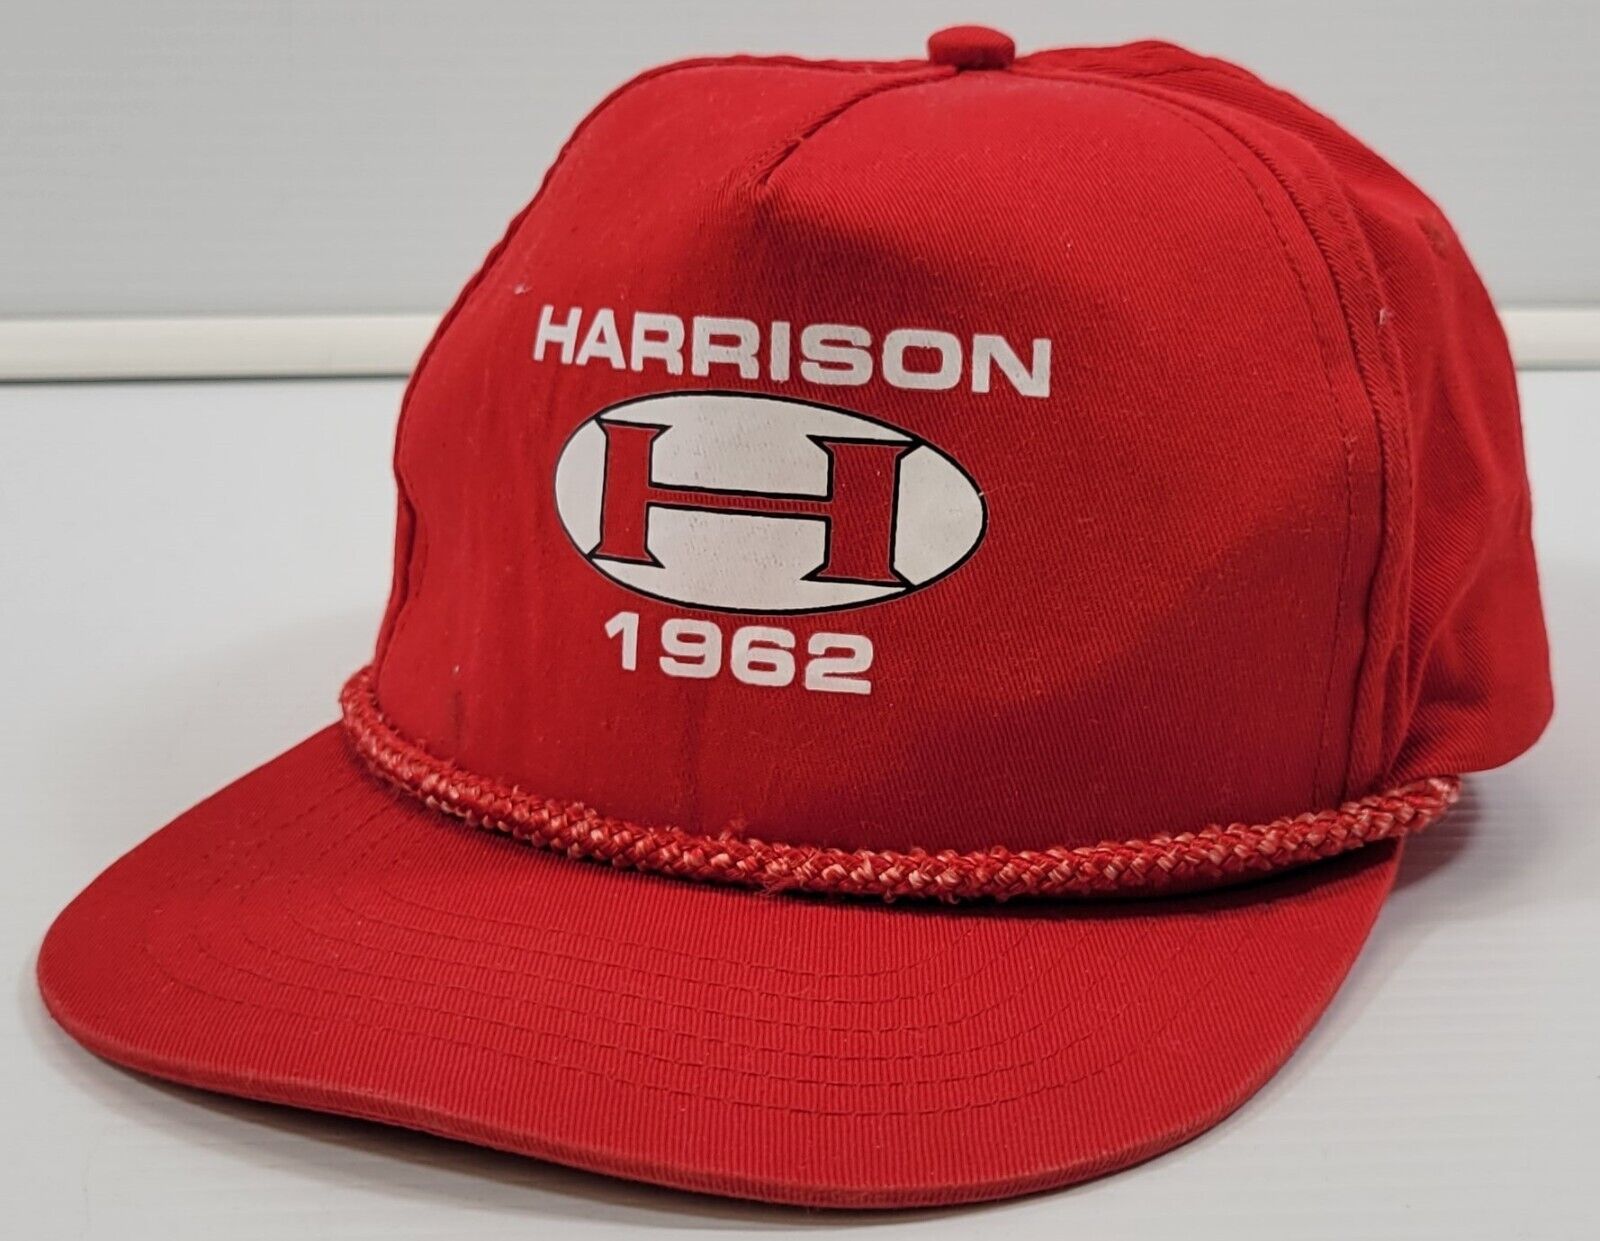 Primary image for I) Harrison 1962 Adult Red Snapback Cotton Baseball Cap